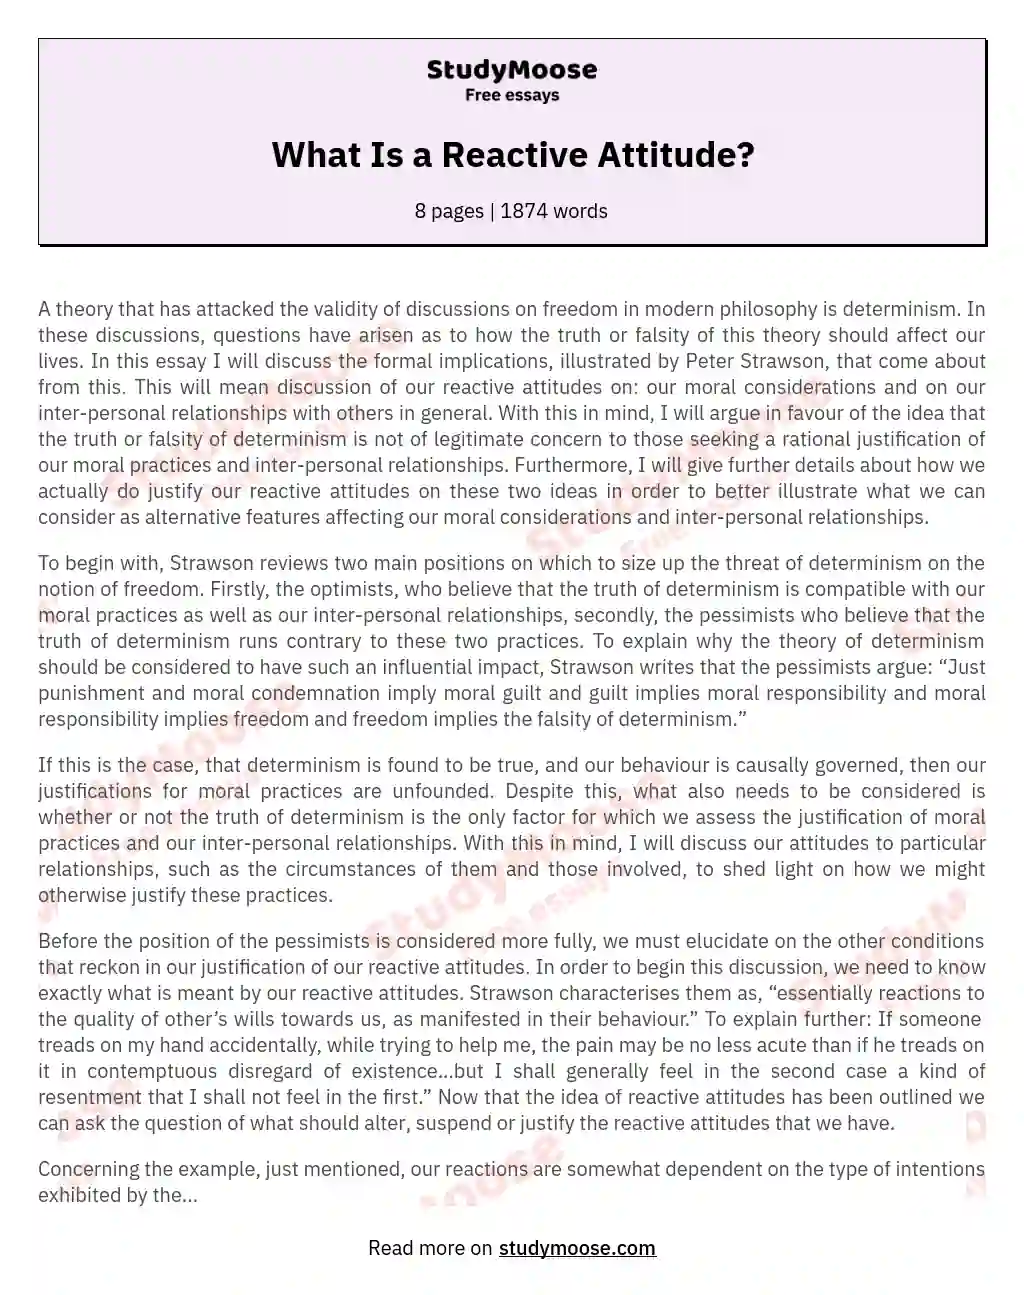 What Is a Reactive Attitude? essay